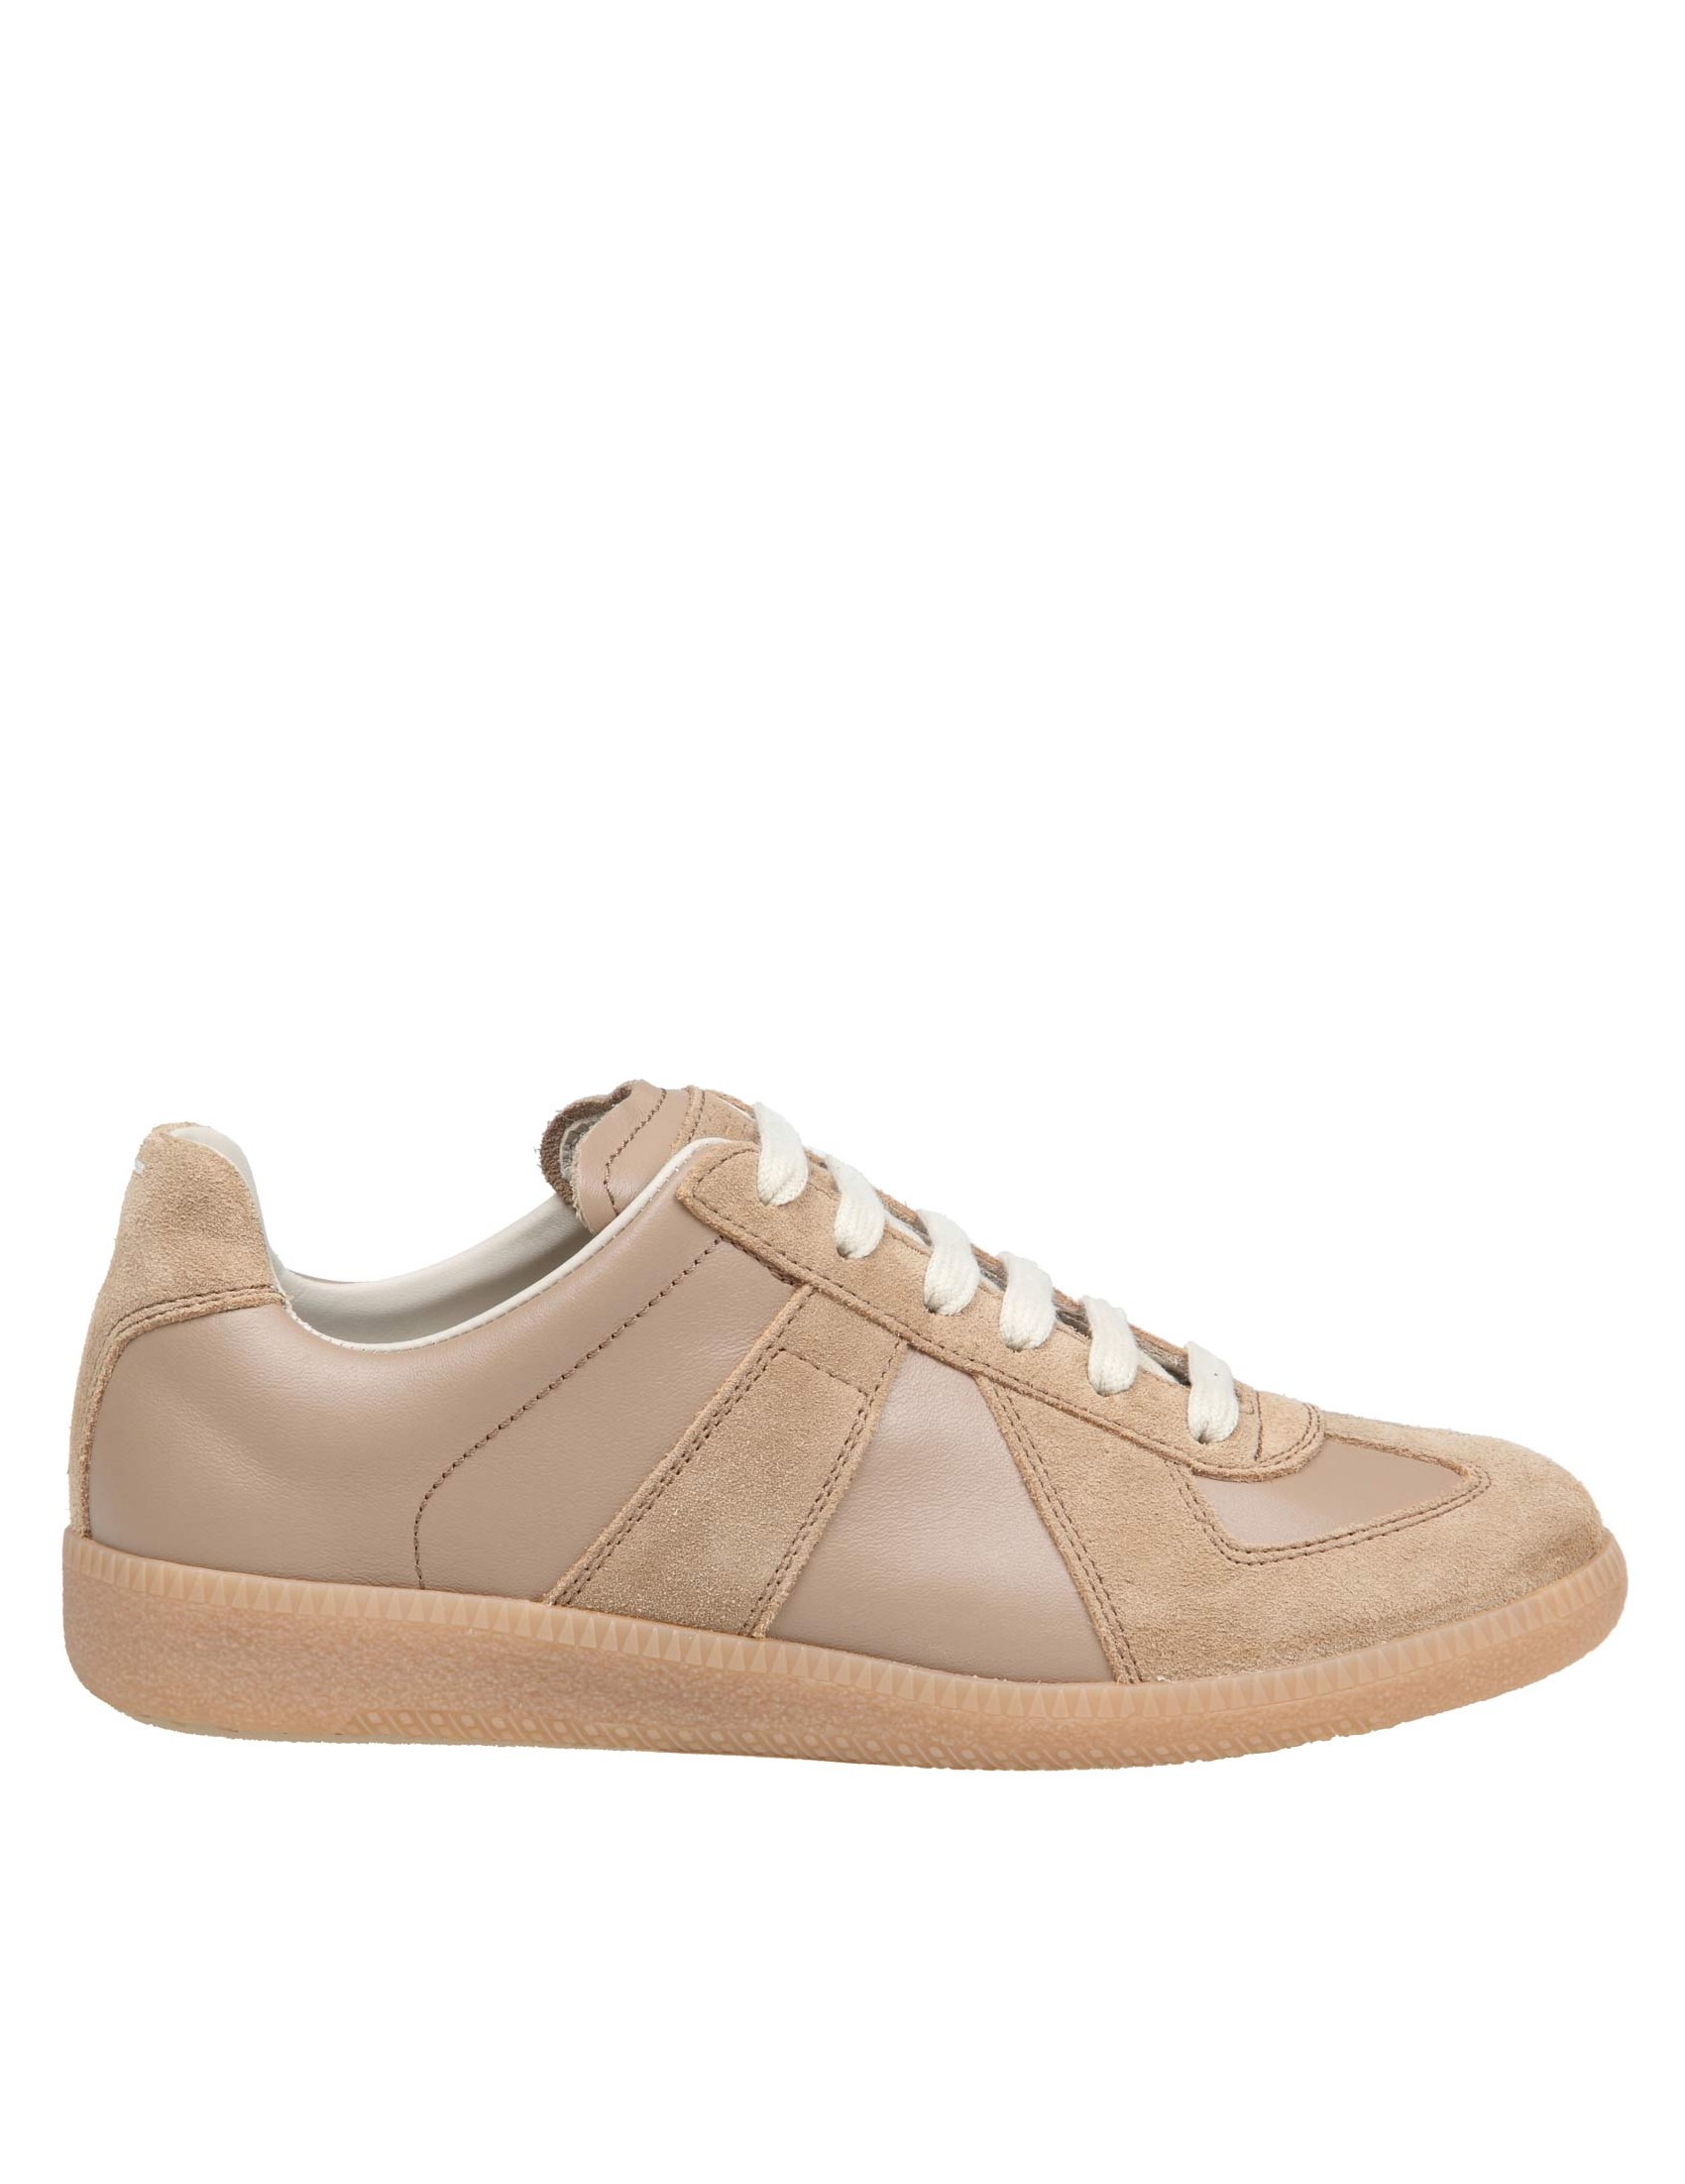 MAISON MARGIELA REPLICA SNEAKERS IN LEATHER AND SUEDE